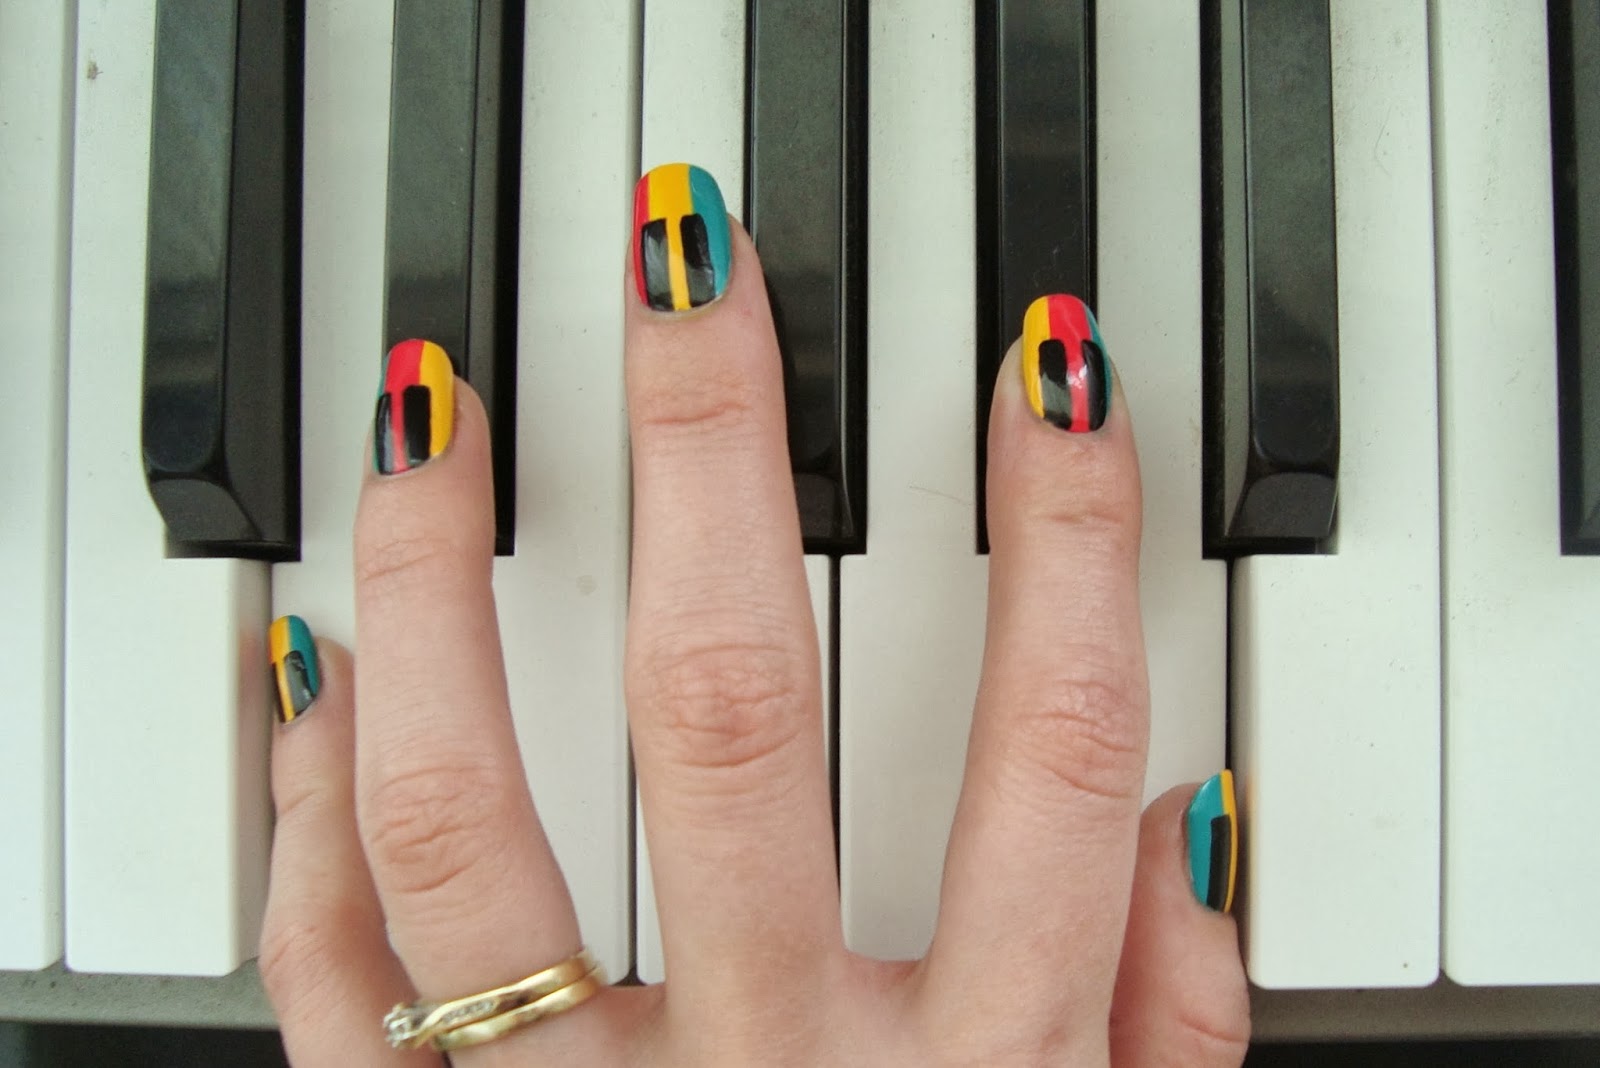 3. Black and White Piano Key Nails - wide 4